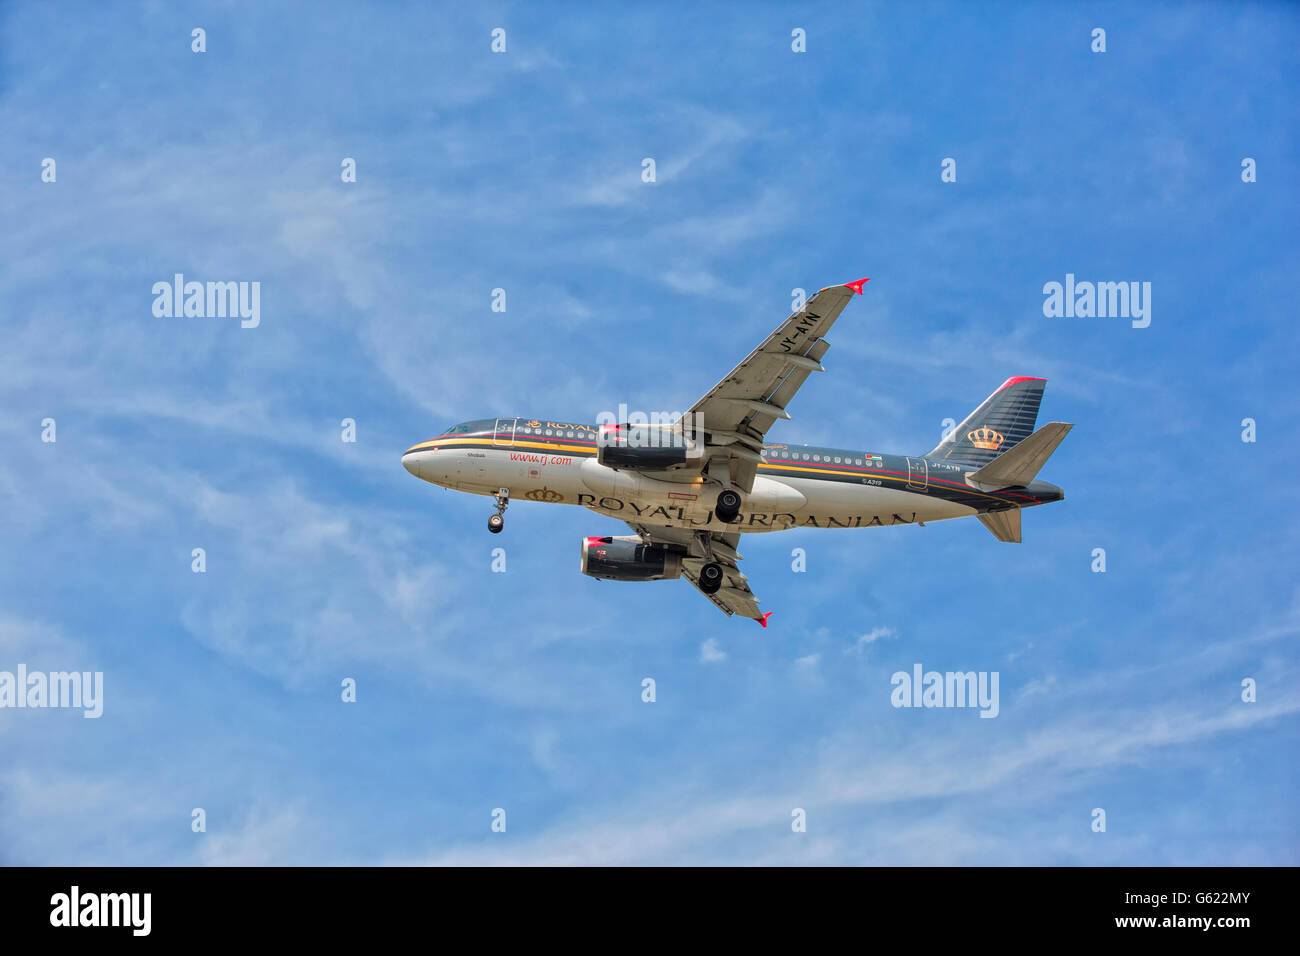 Aeroplane, cloudy sky, Royal Jordanian Airlines Airbus A319 Stock Photo